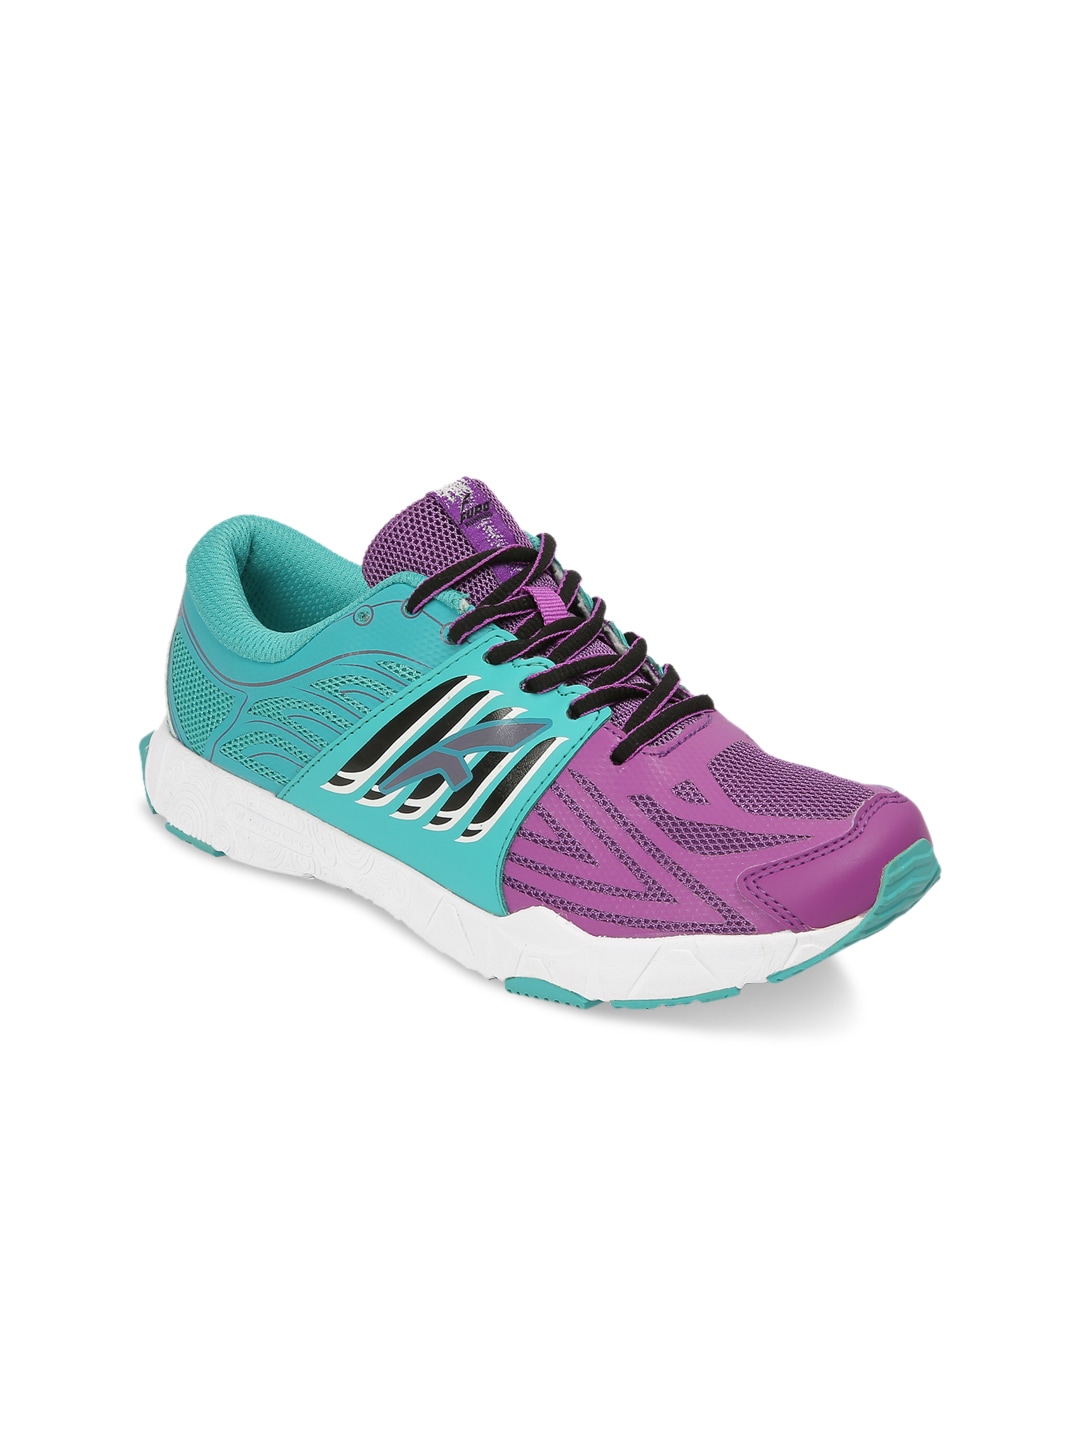 FURO by Red Chief Women Purple Mesh Mid-Top Running Shoes Price in India